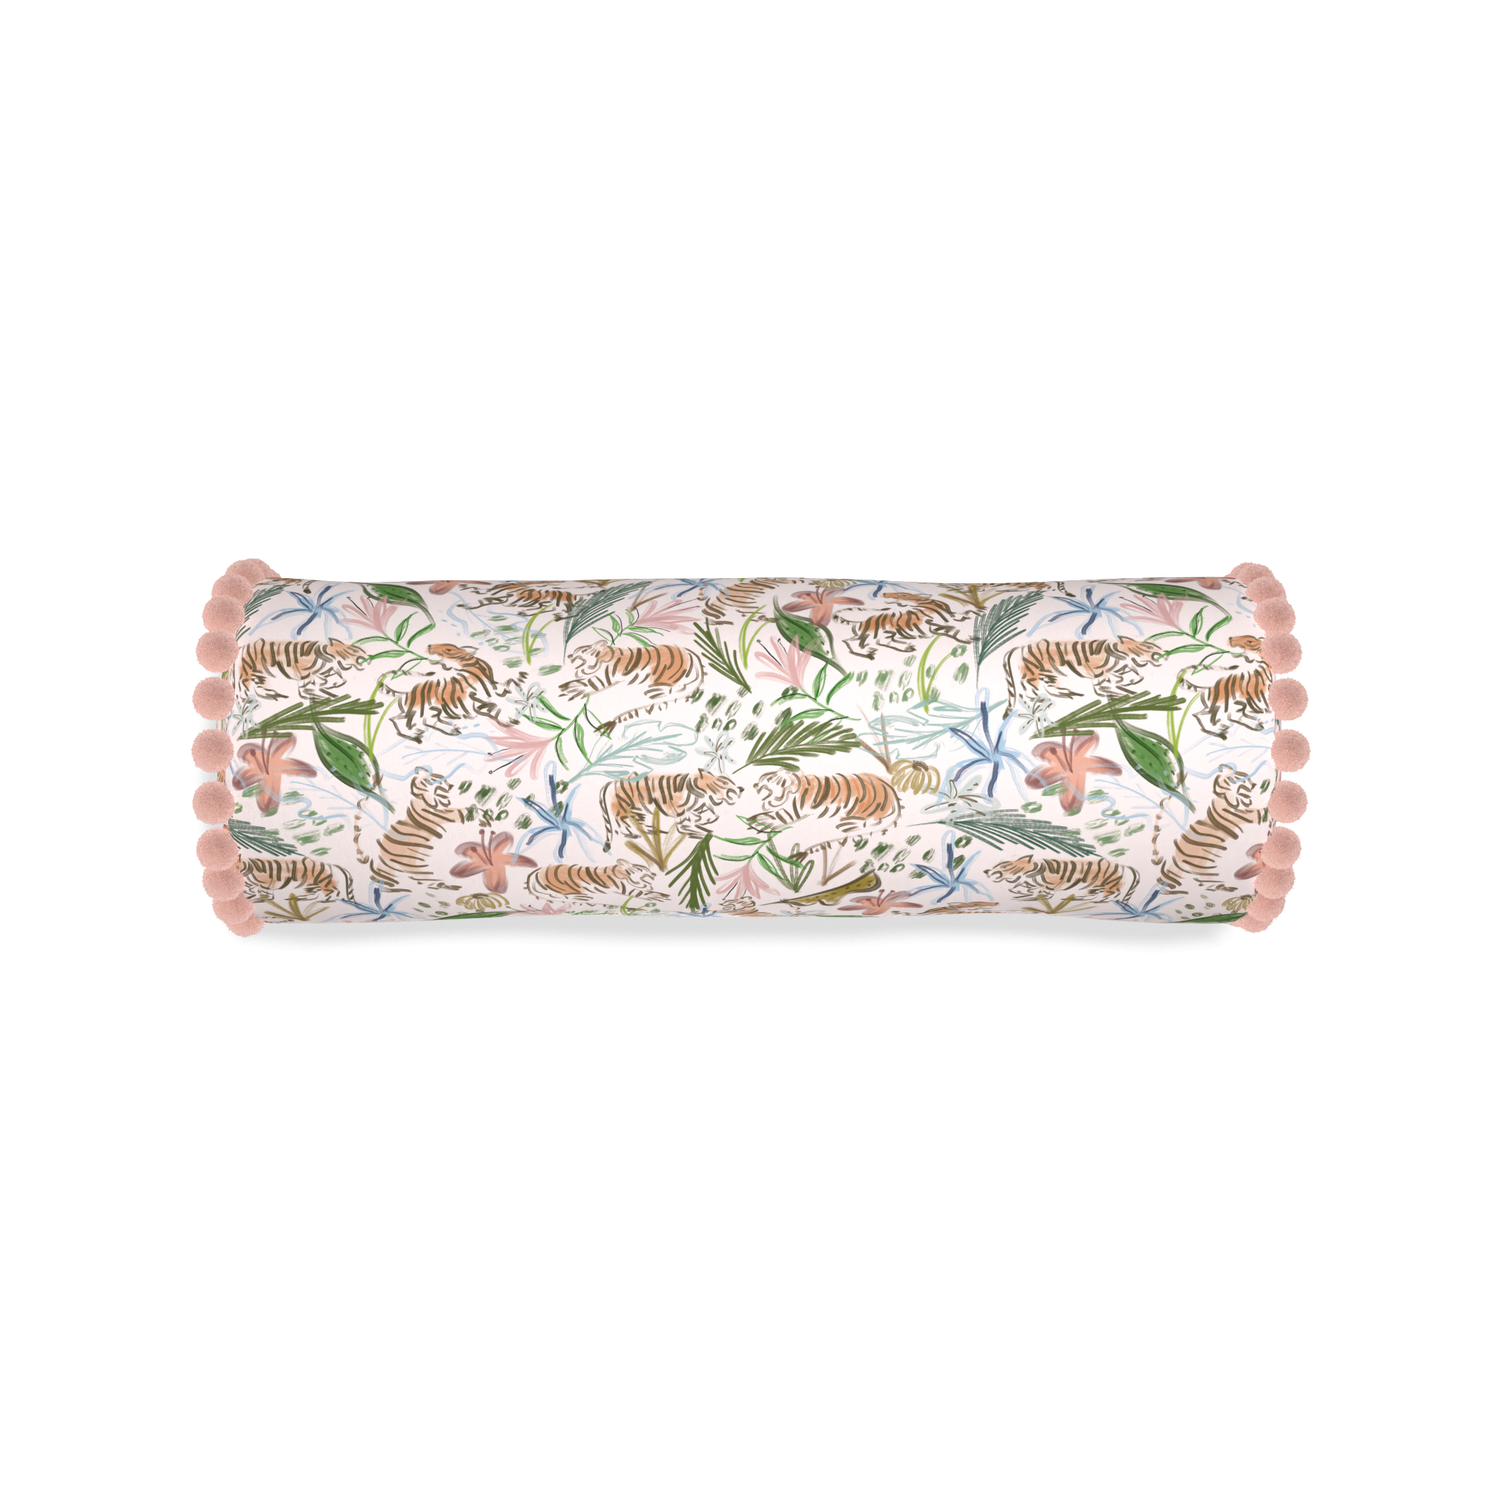 Bolster frida pink custom pink chinoiserie tigerpillow with rose pom pom on white background